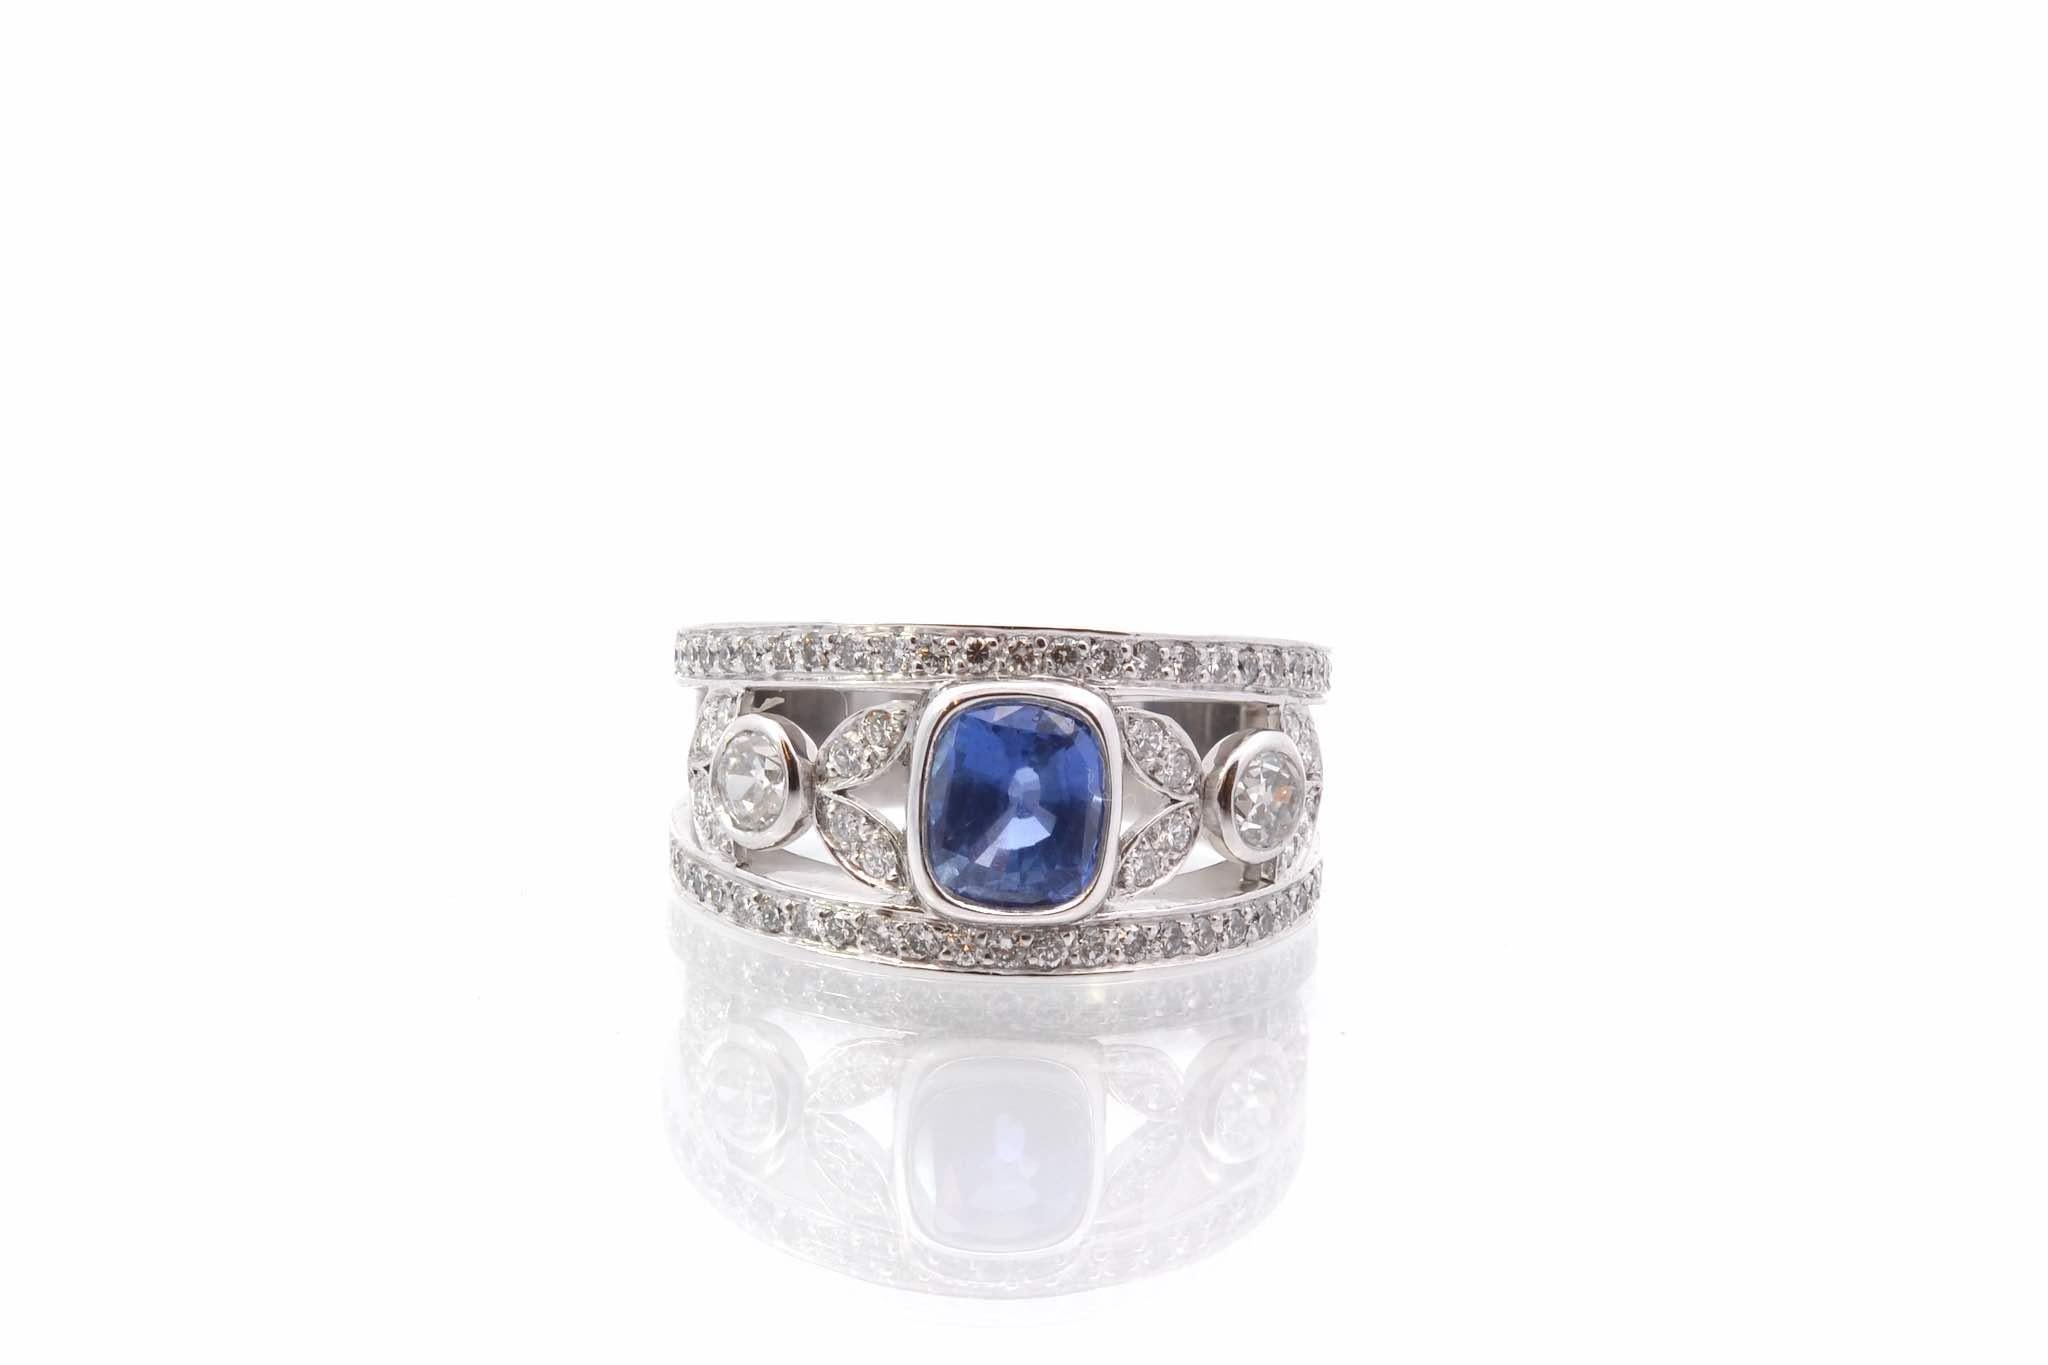 Stones: Sapphire of 1.63 cts and 68 diamonds 0.97 ct
Material: Platinum
Dimensions: 1.1cm
Weight: 15.3g
Period: Recent
Size: 52 (free sizing)
Certificate
Ref. :25659